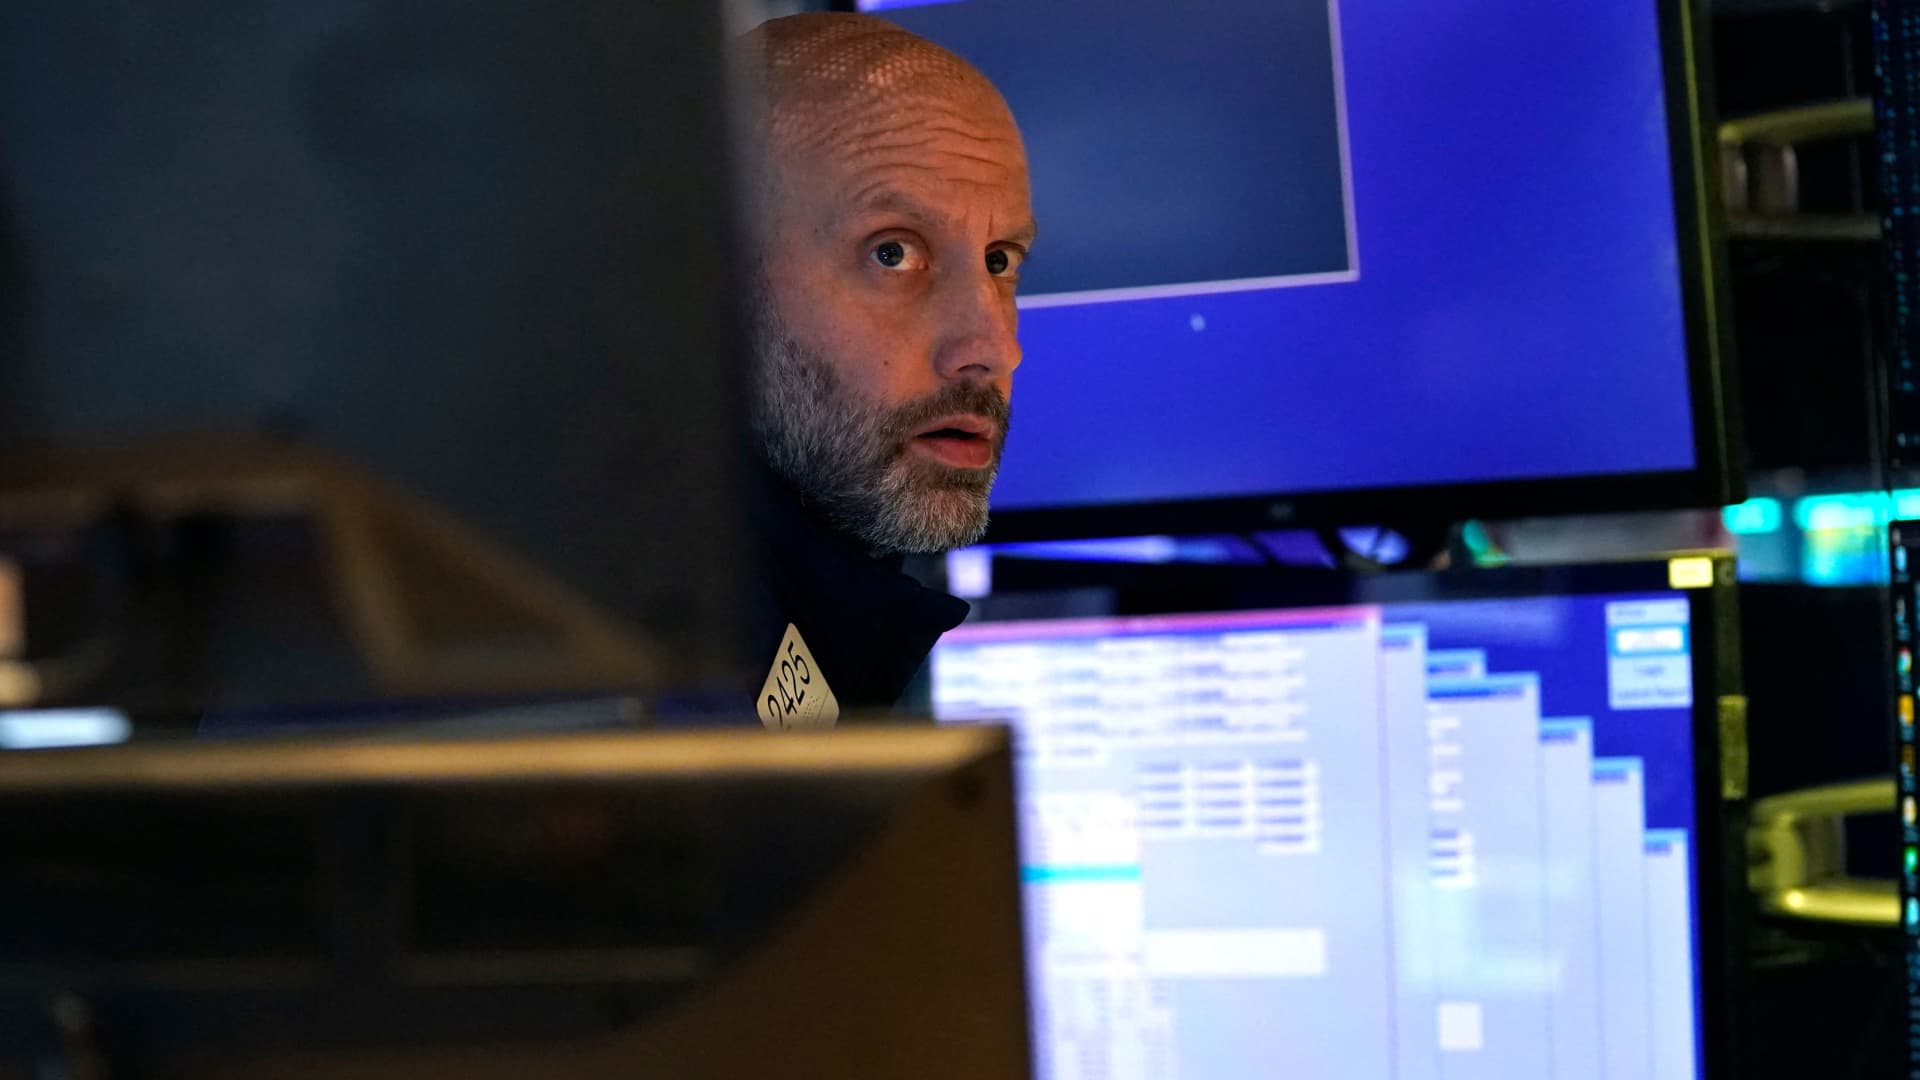 Want to beat the market volatility? A fund manager explains how